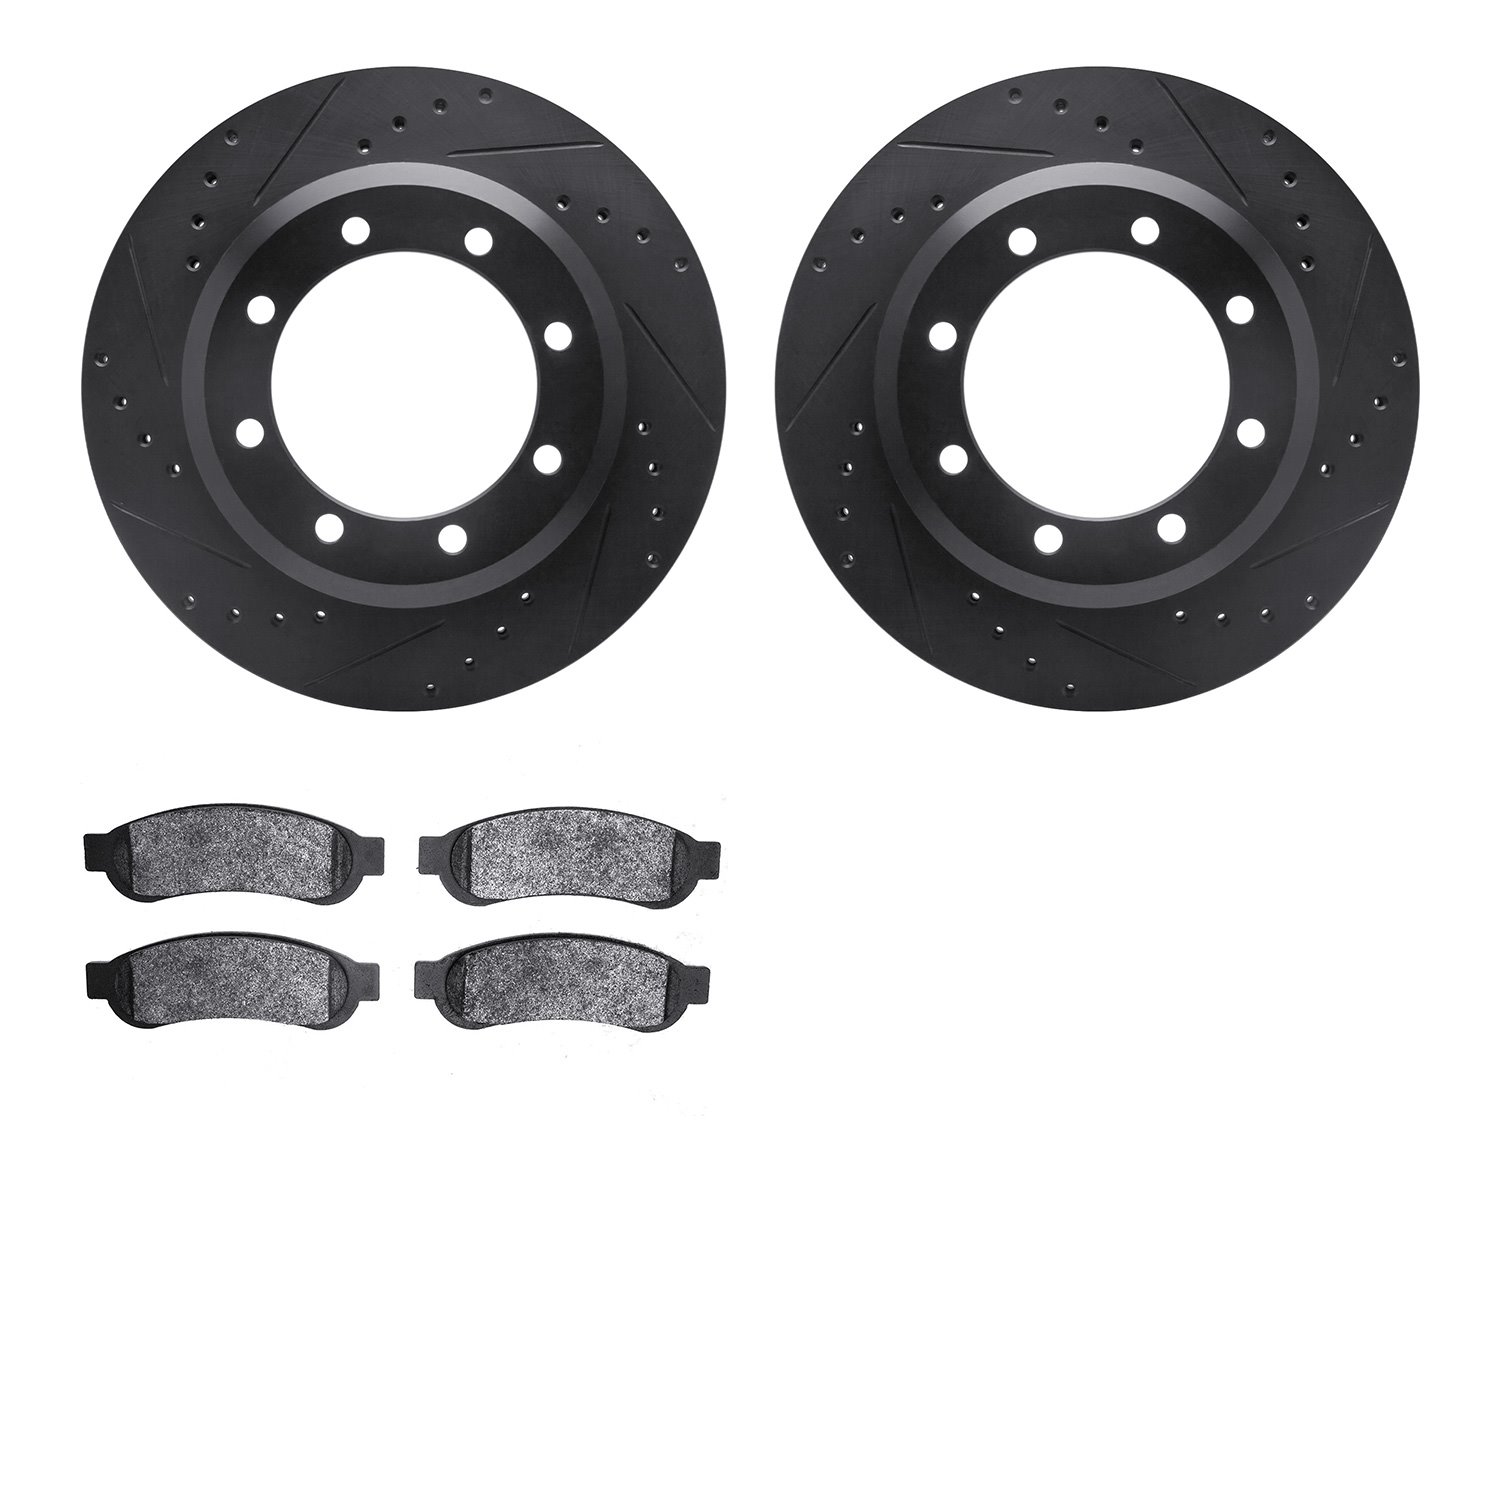 8402-54086 Drilled/Slotted Brake Rotors with Ultimate-Duty Brake Pads Kit [Black], 2010-2012 Ford/Lincoln/Mercury/Mazda, Positio